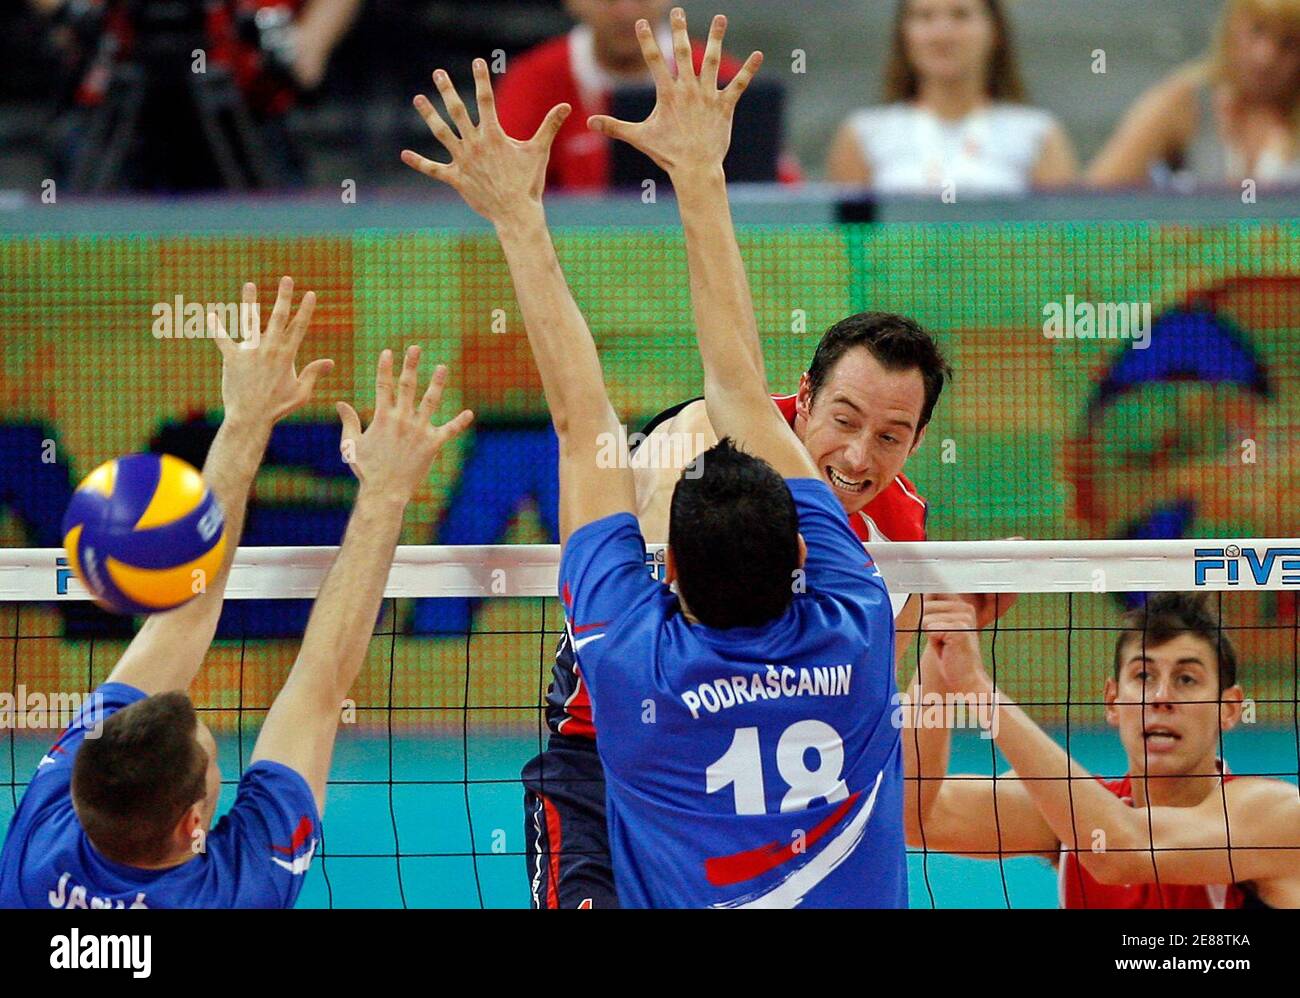 David Lee of the U.S. spikes the ball against Serbia's Bojan Janic (L) and Marko Podrascanin during their men's World League 2009 final round volleyball match in Belgrade July 22, 2009.  REUTERS/Ivan Milutinovic (SERBIA SPORT VOLLEYBALL) Stock Photo